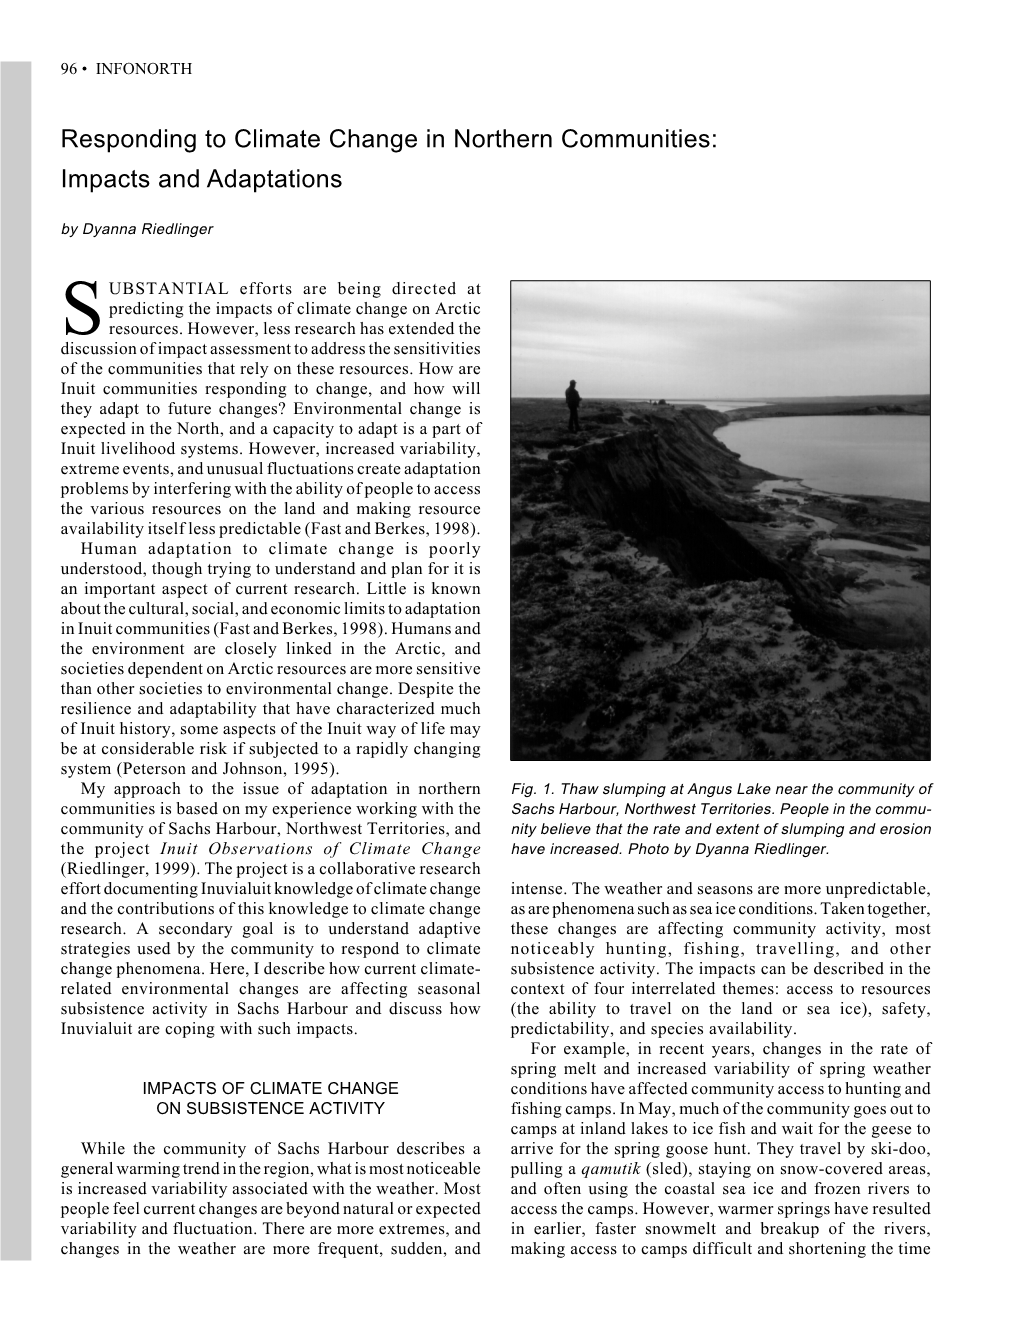 Responding to Climate Change in Northern Communities: Impacts and Adaptations by Dyanna Riedlinger